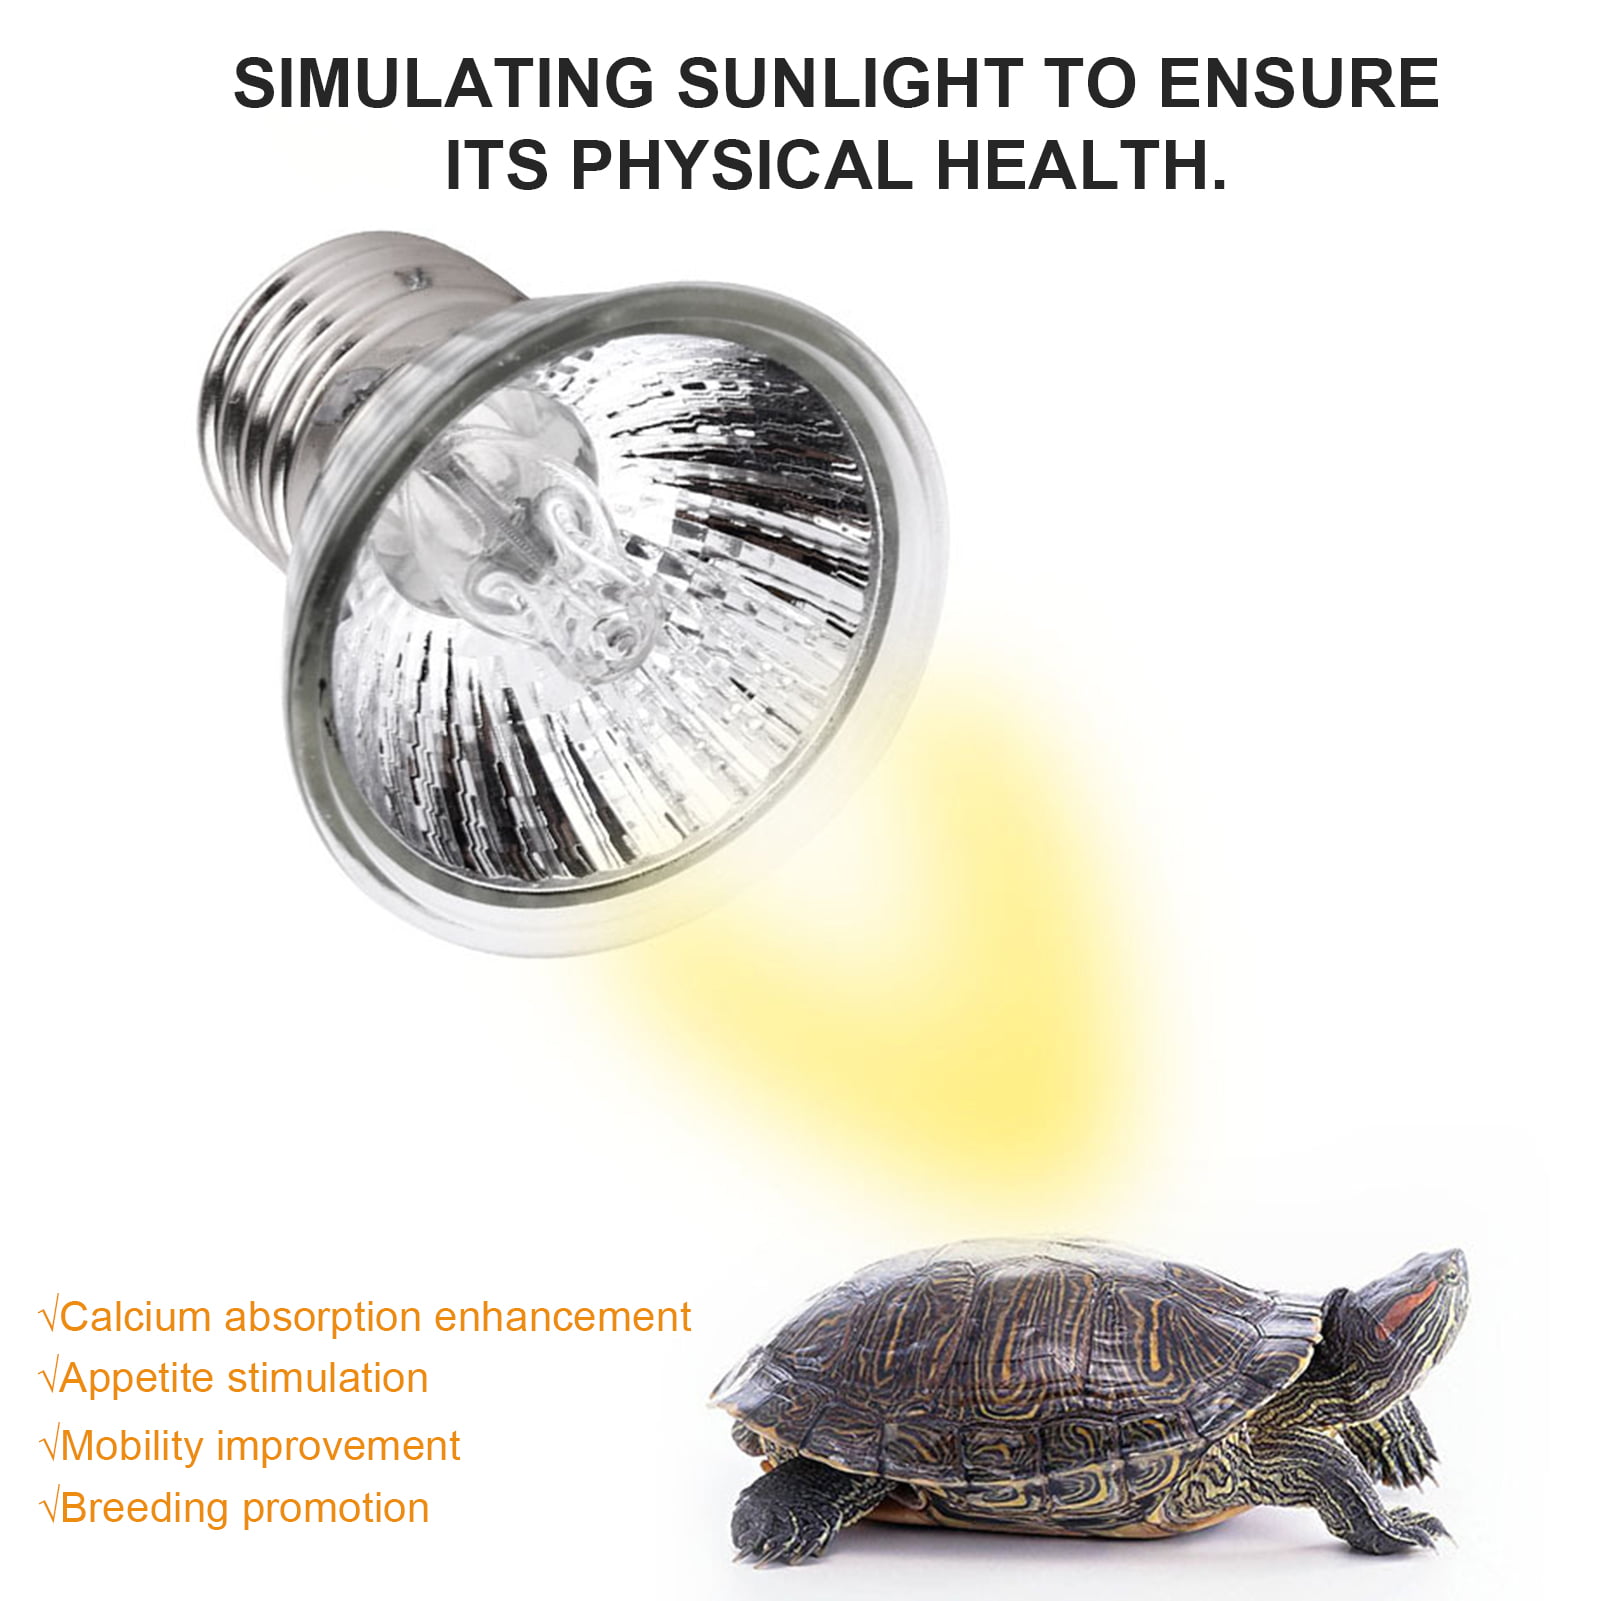 25W+50W Basking Light for Reptiles,E27 UVA+UVB Heat Spotlight with Holder with 360 °Rotating Clip & Power Supply for Reptiles/Amphibians/Lizards/Turtles/Snakes Aode Tortoise Heat Lamp